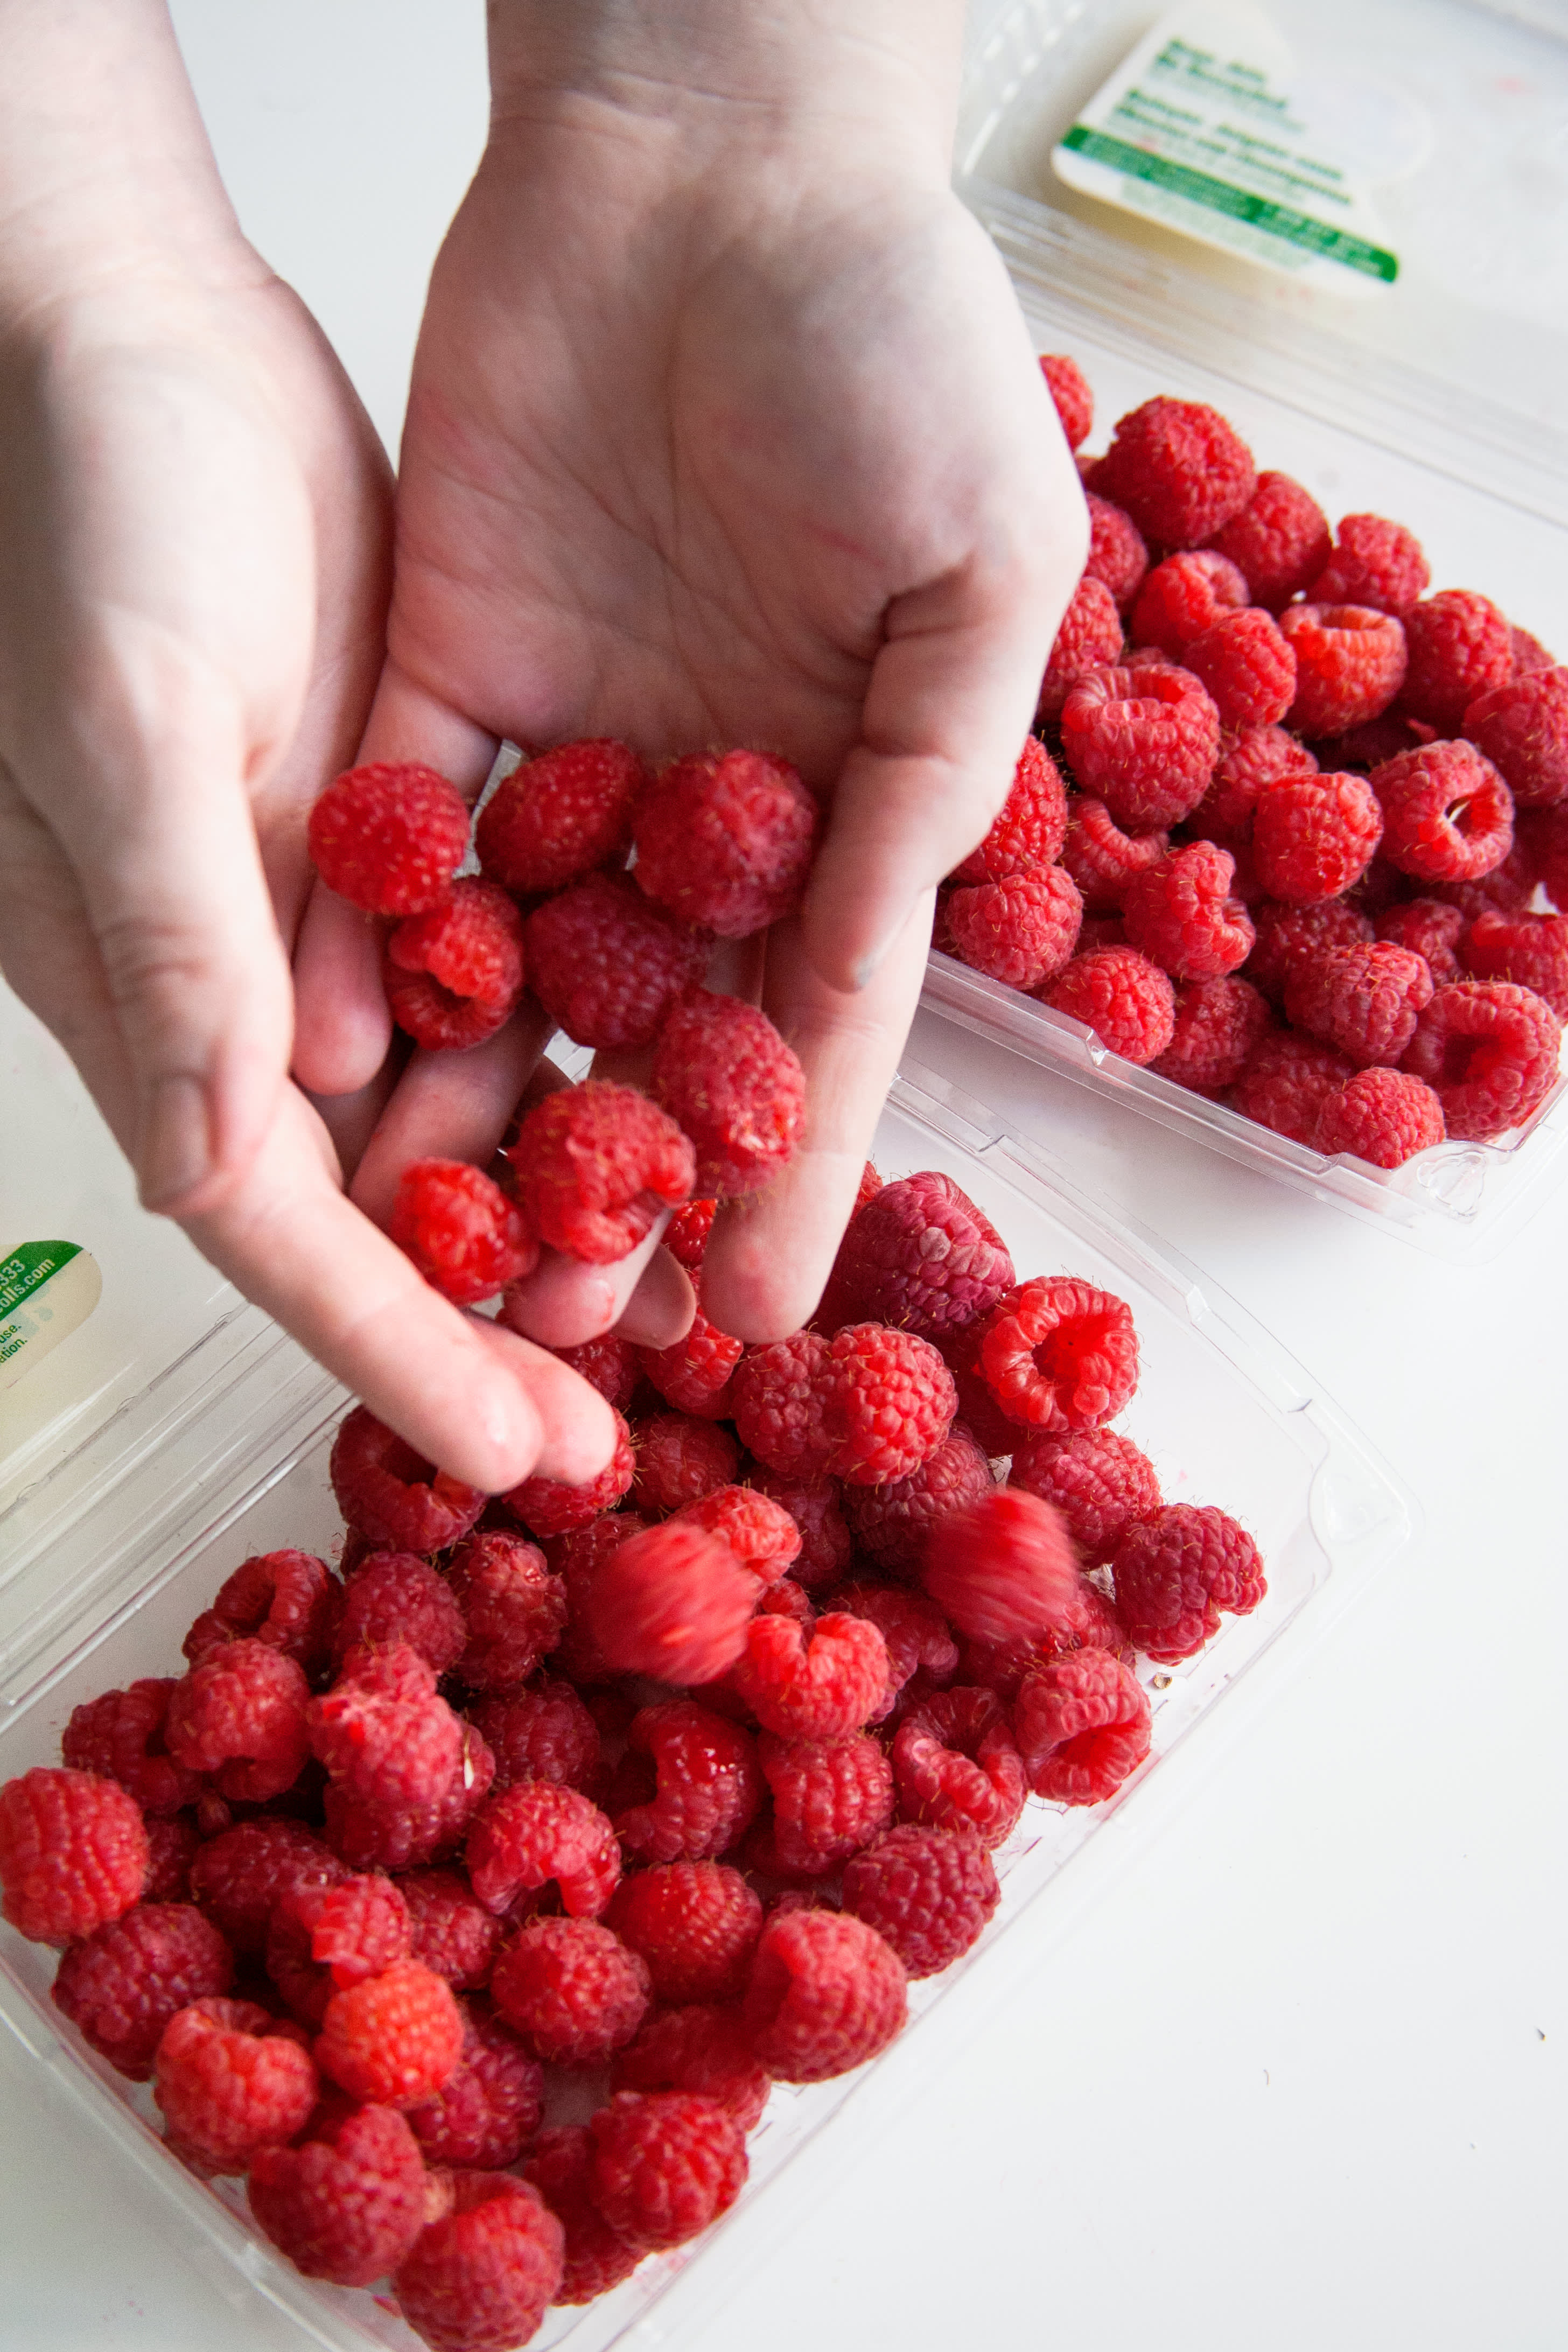 Shoppers Say This Nifty Container Is a 'Money Saver,' and Can Keep Berries  Fresh for '5 Weeks